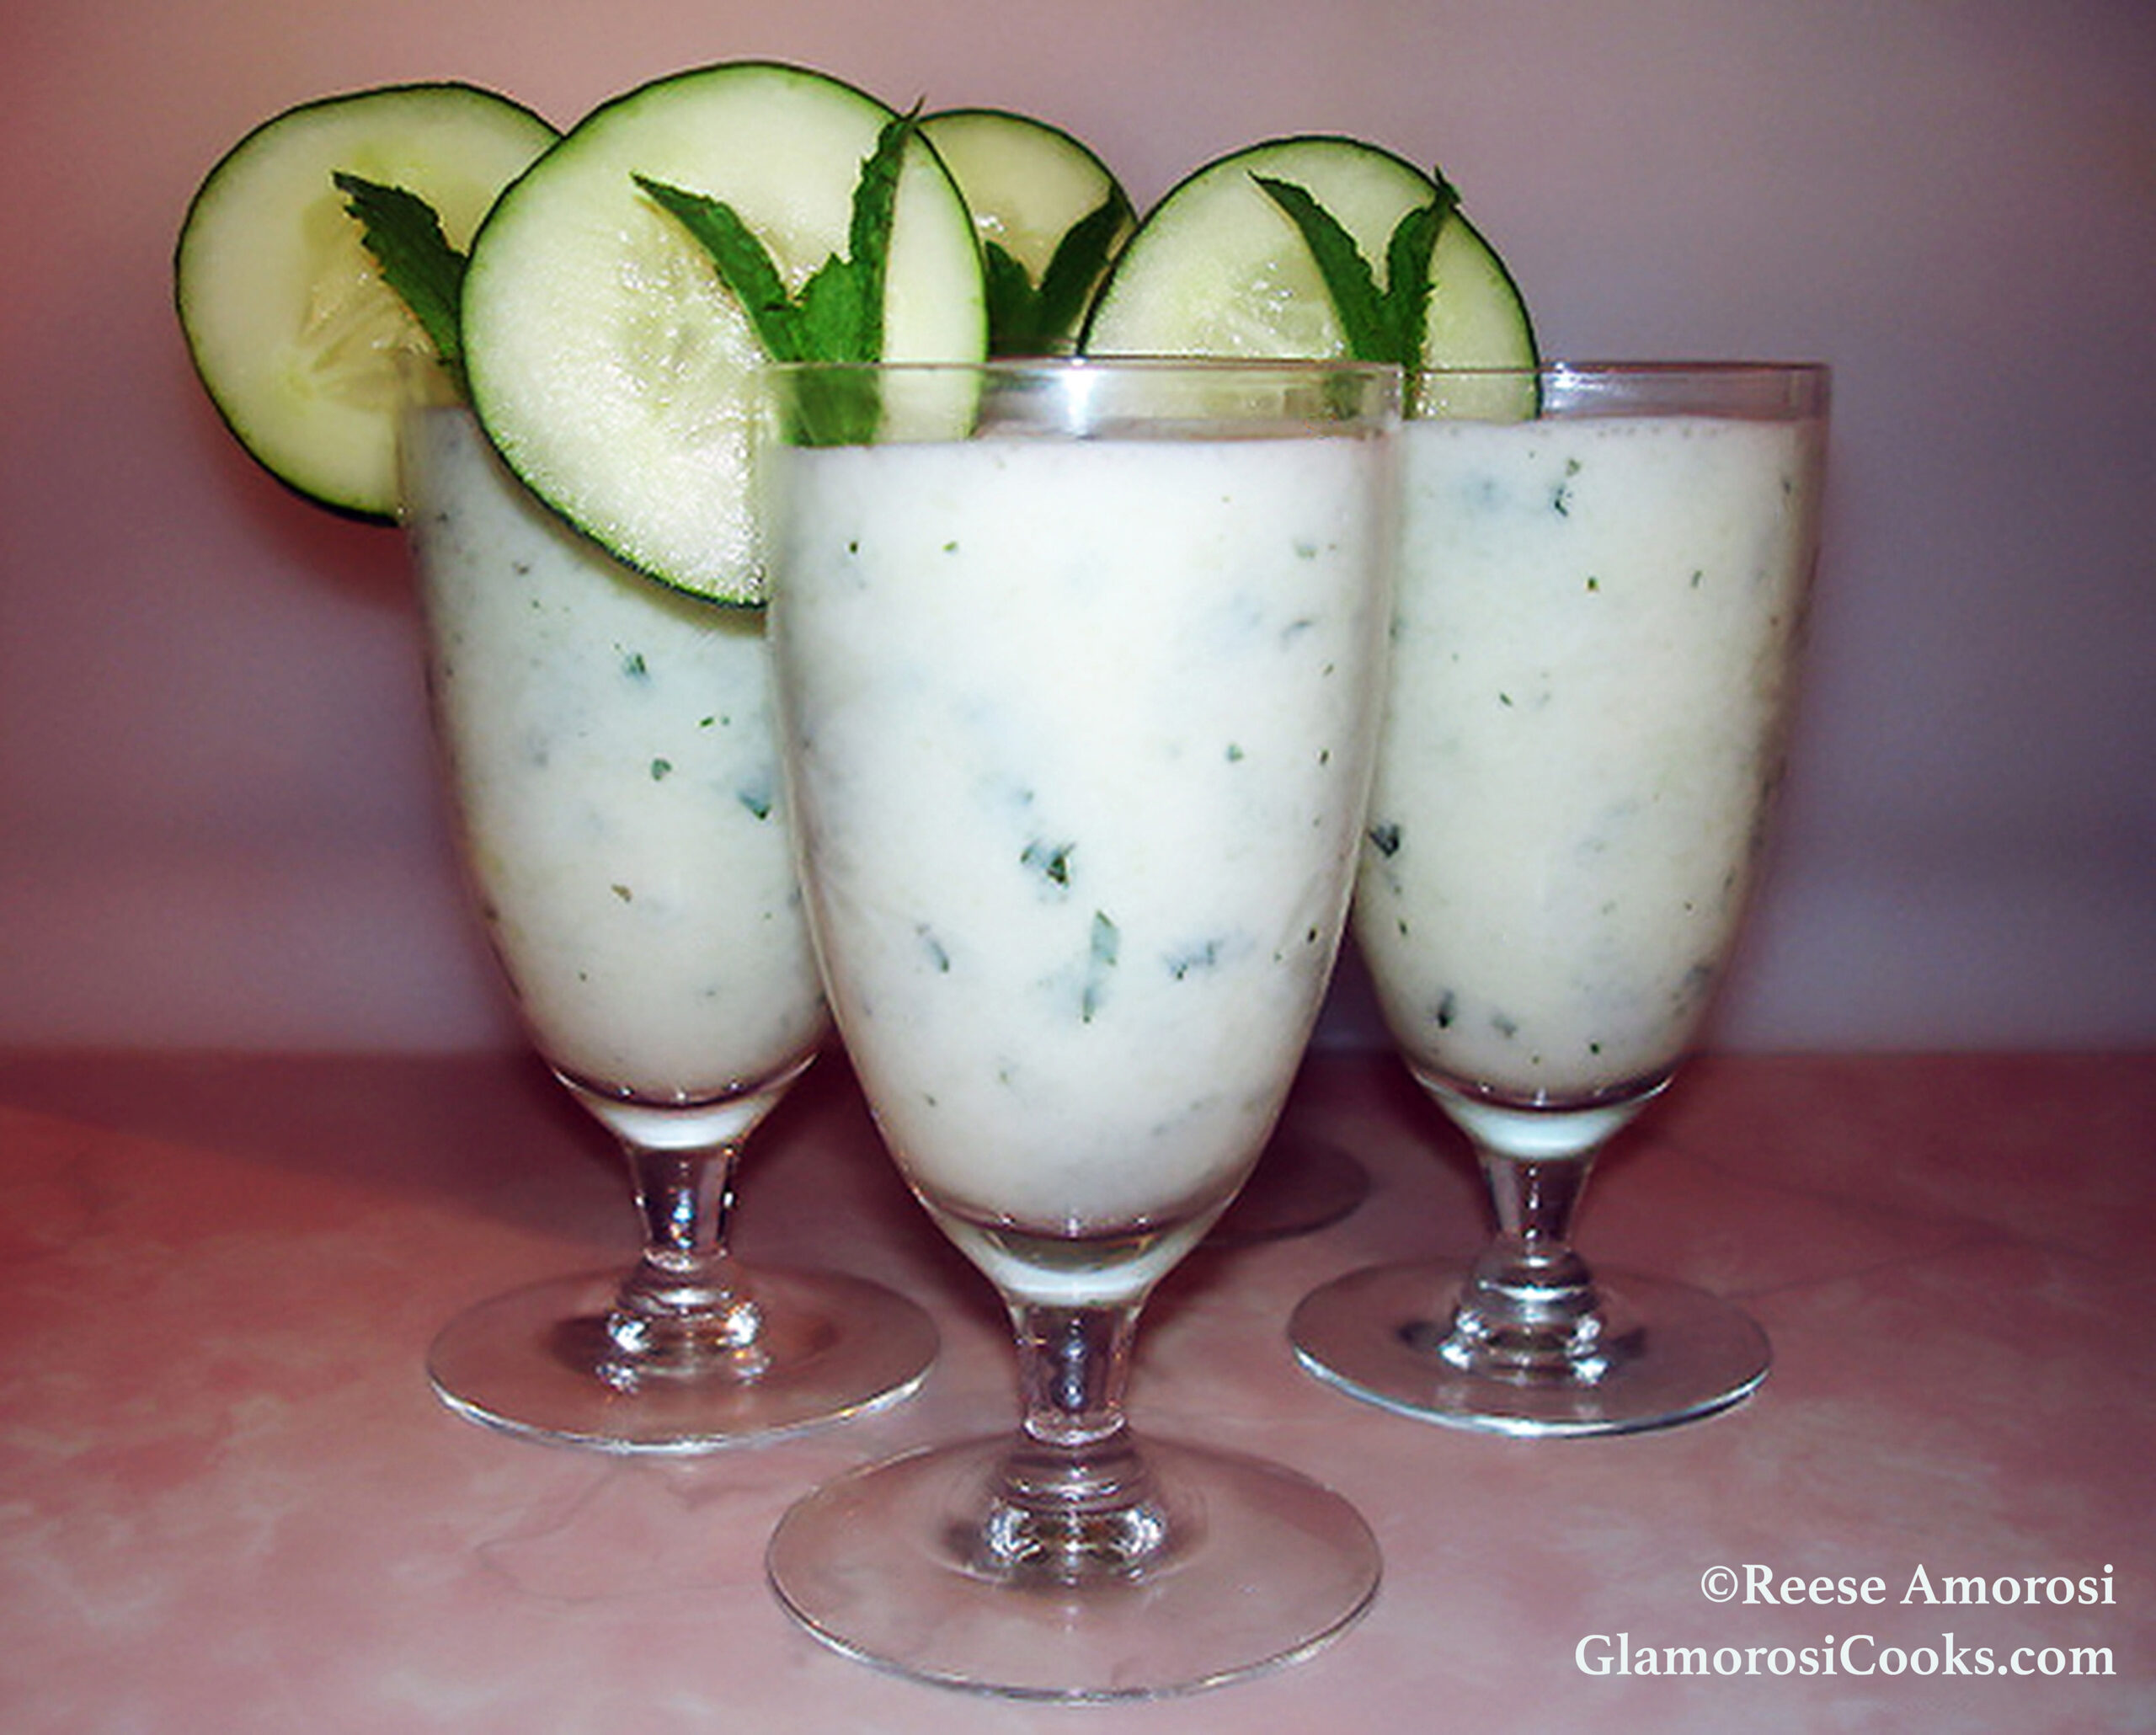 This photo shows the completed recipe for Chilled Cucumber Soup by Reese Amorosi for GlamorosiCooks.com. The soup is an off-white color with green spearmint leaves in the mix. It is shown served in cocktail glasses; all four of them are garnished with round cucumber slices and a sprig of mint.